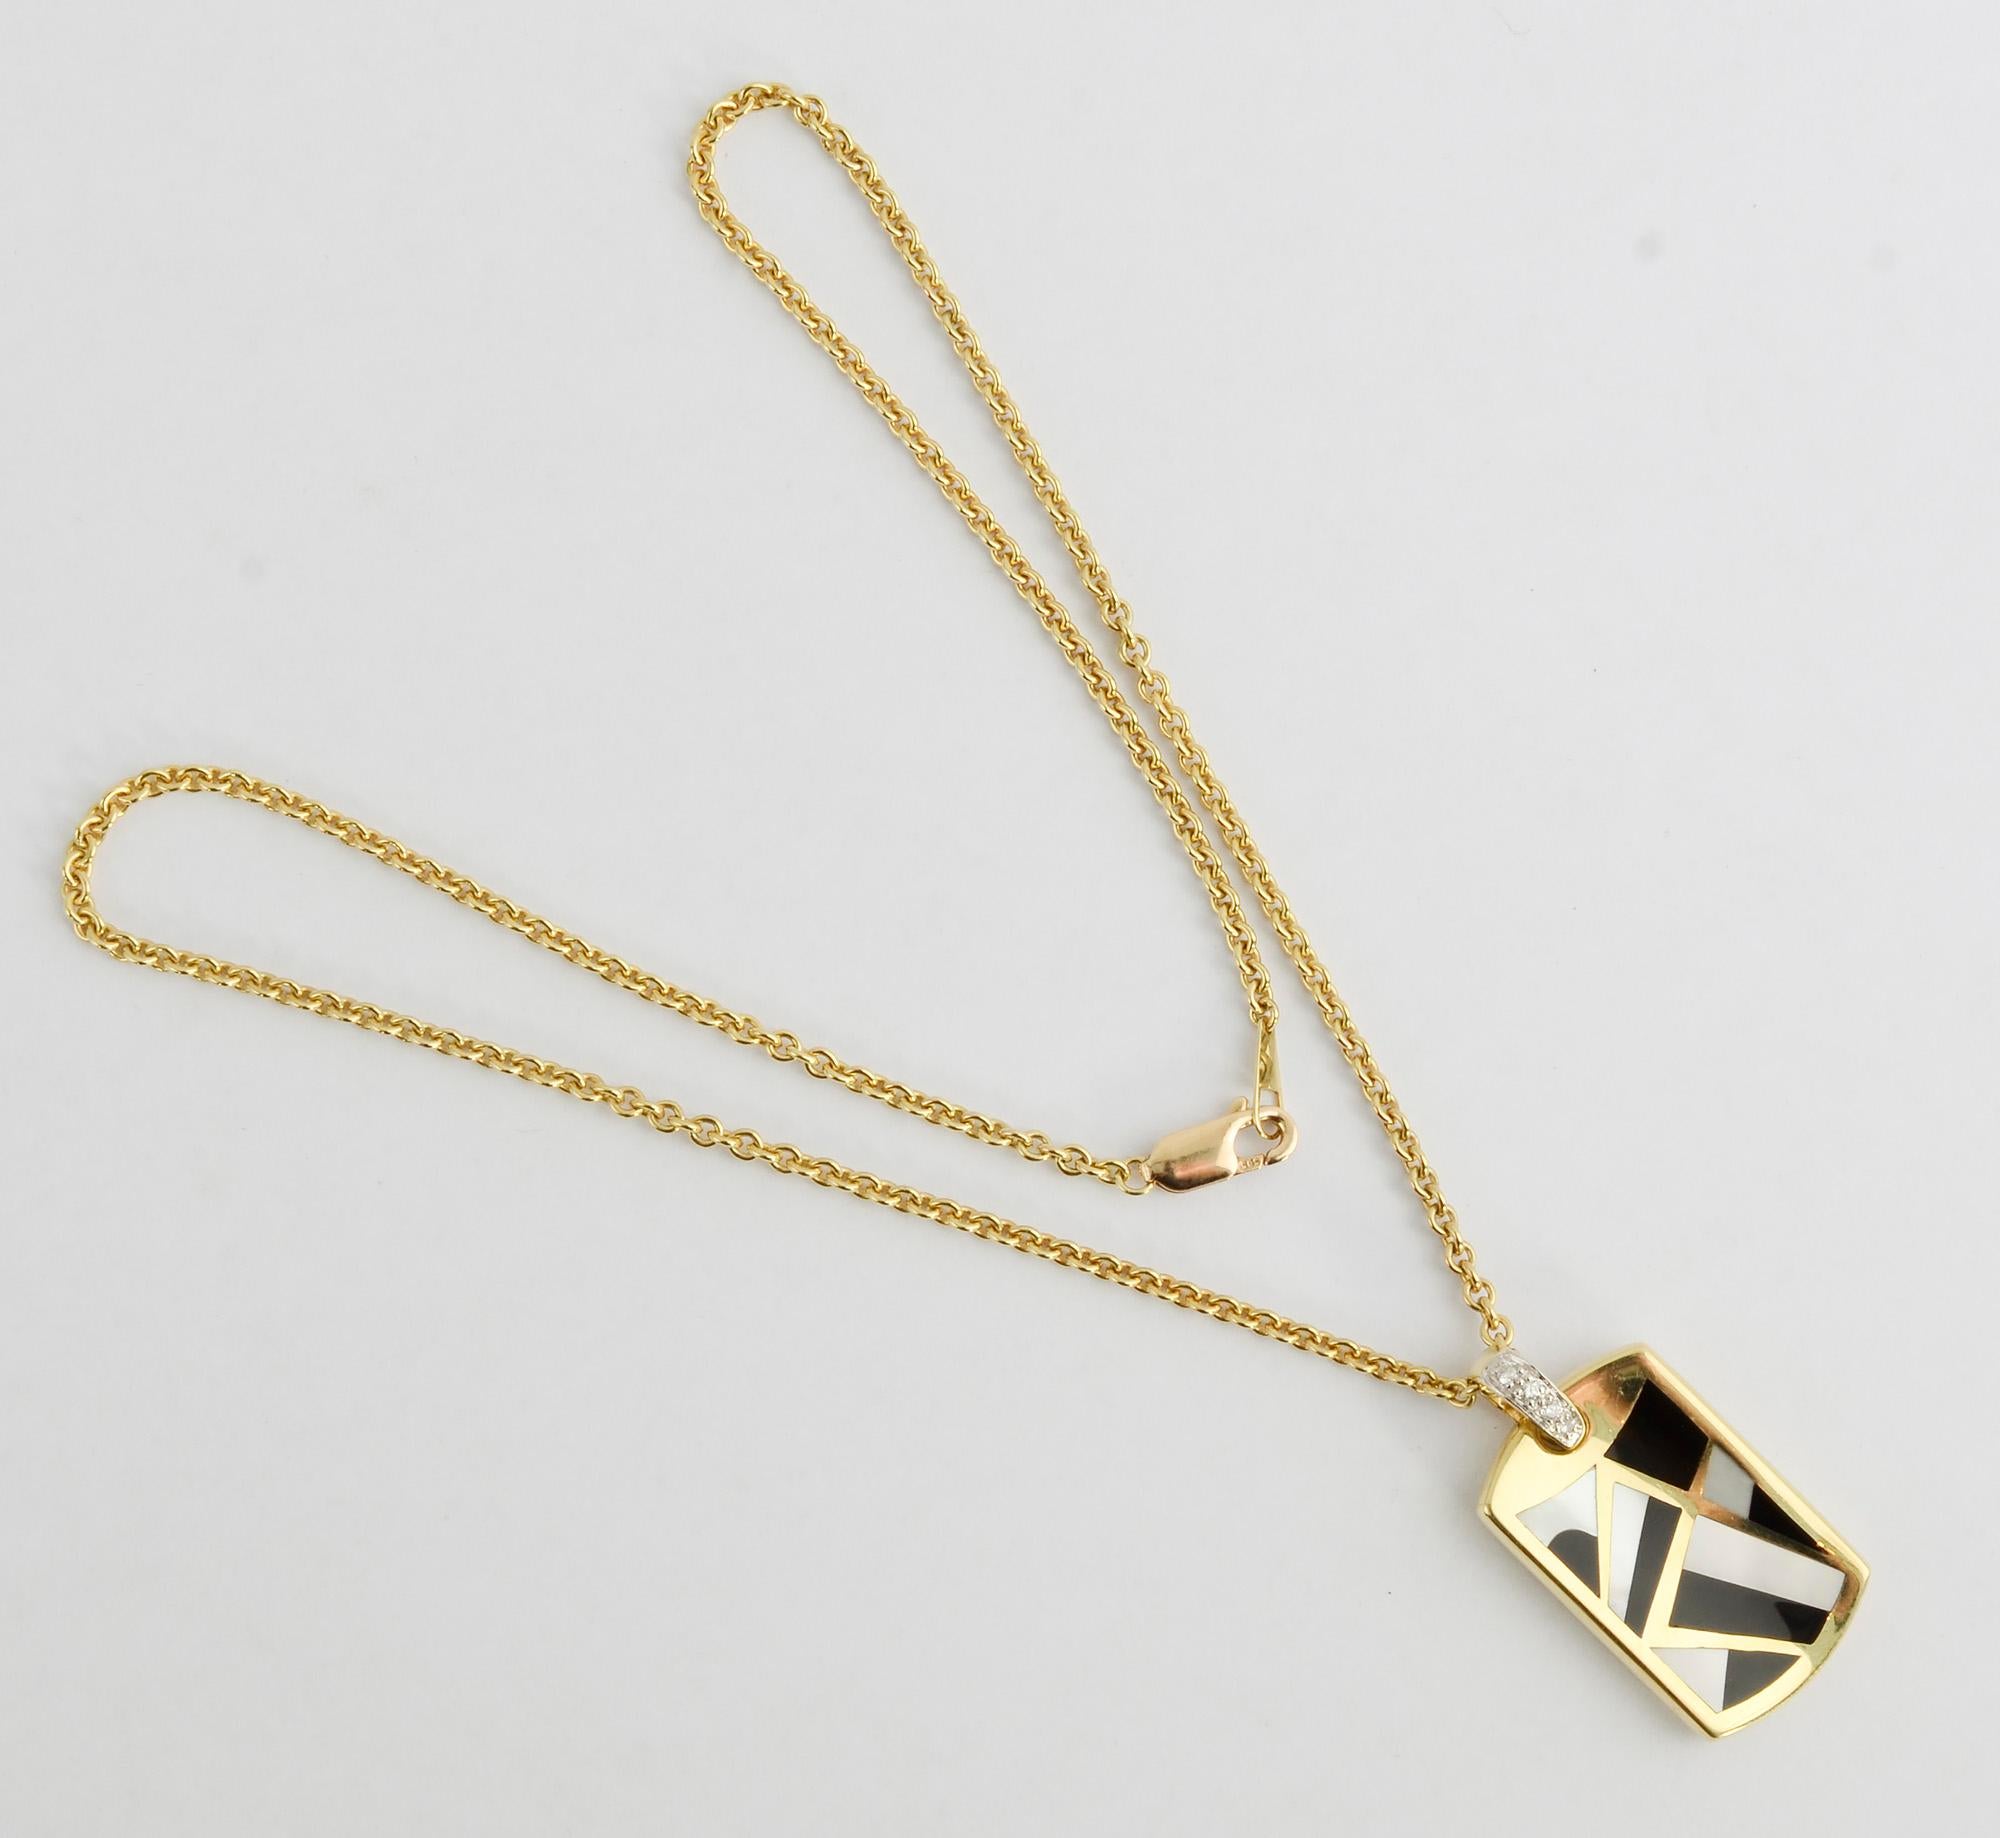 Geometric design pendant necklace by Asch Grossbardt with the use of varied inlaid stones for which they are known. The pendant has mother of pearl and black onyx. The bail is set with diamonds. The pendant is a slightly concave shape. It can also